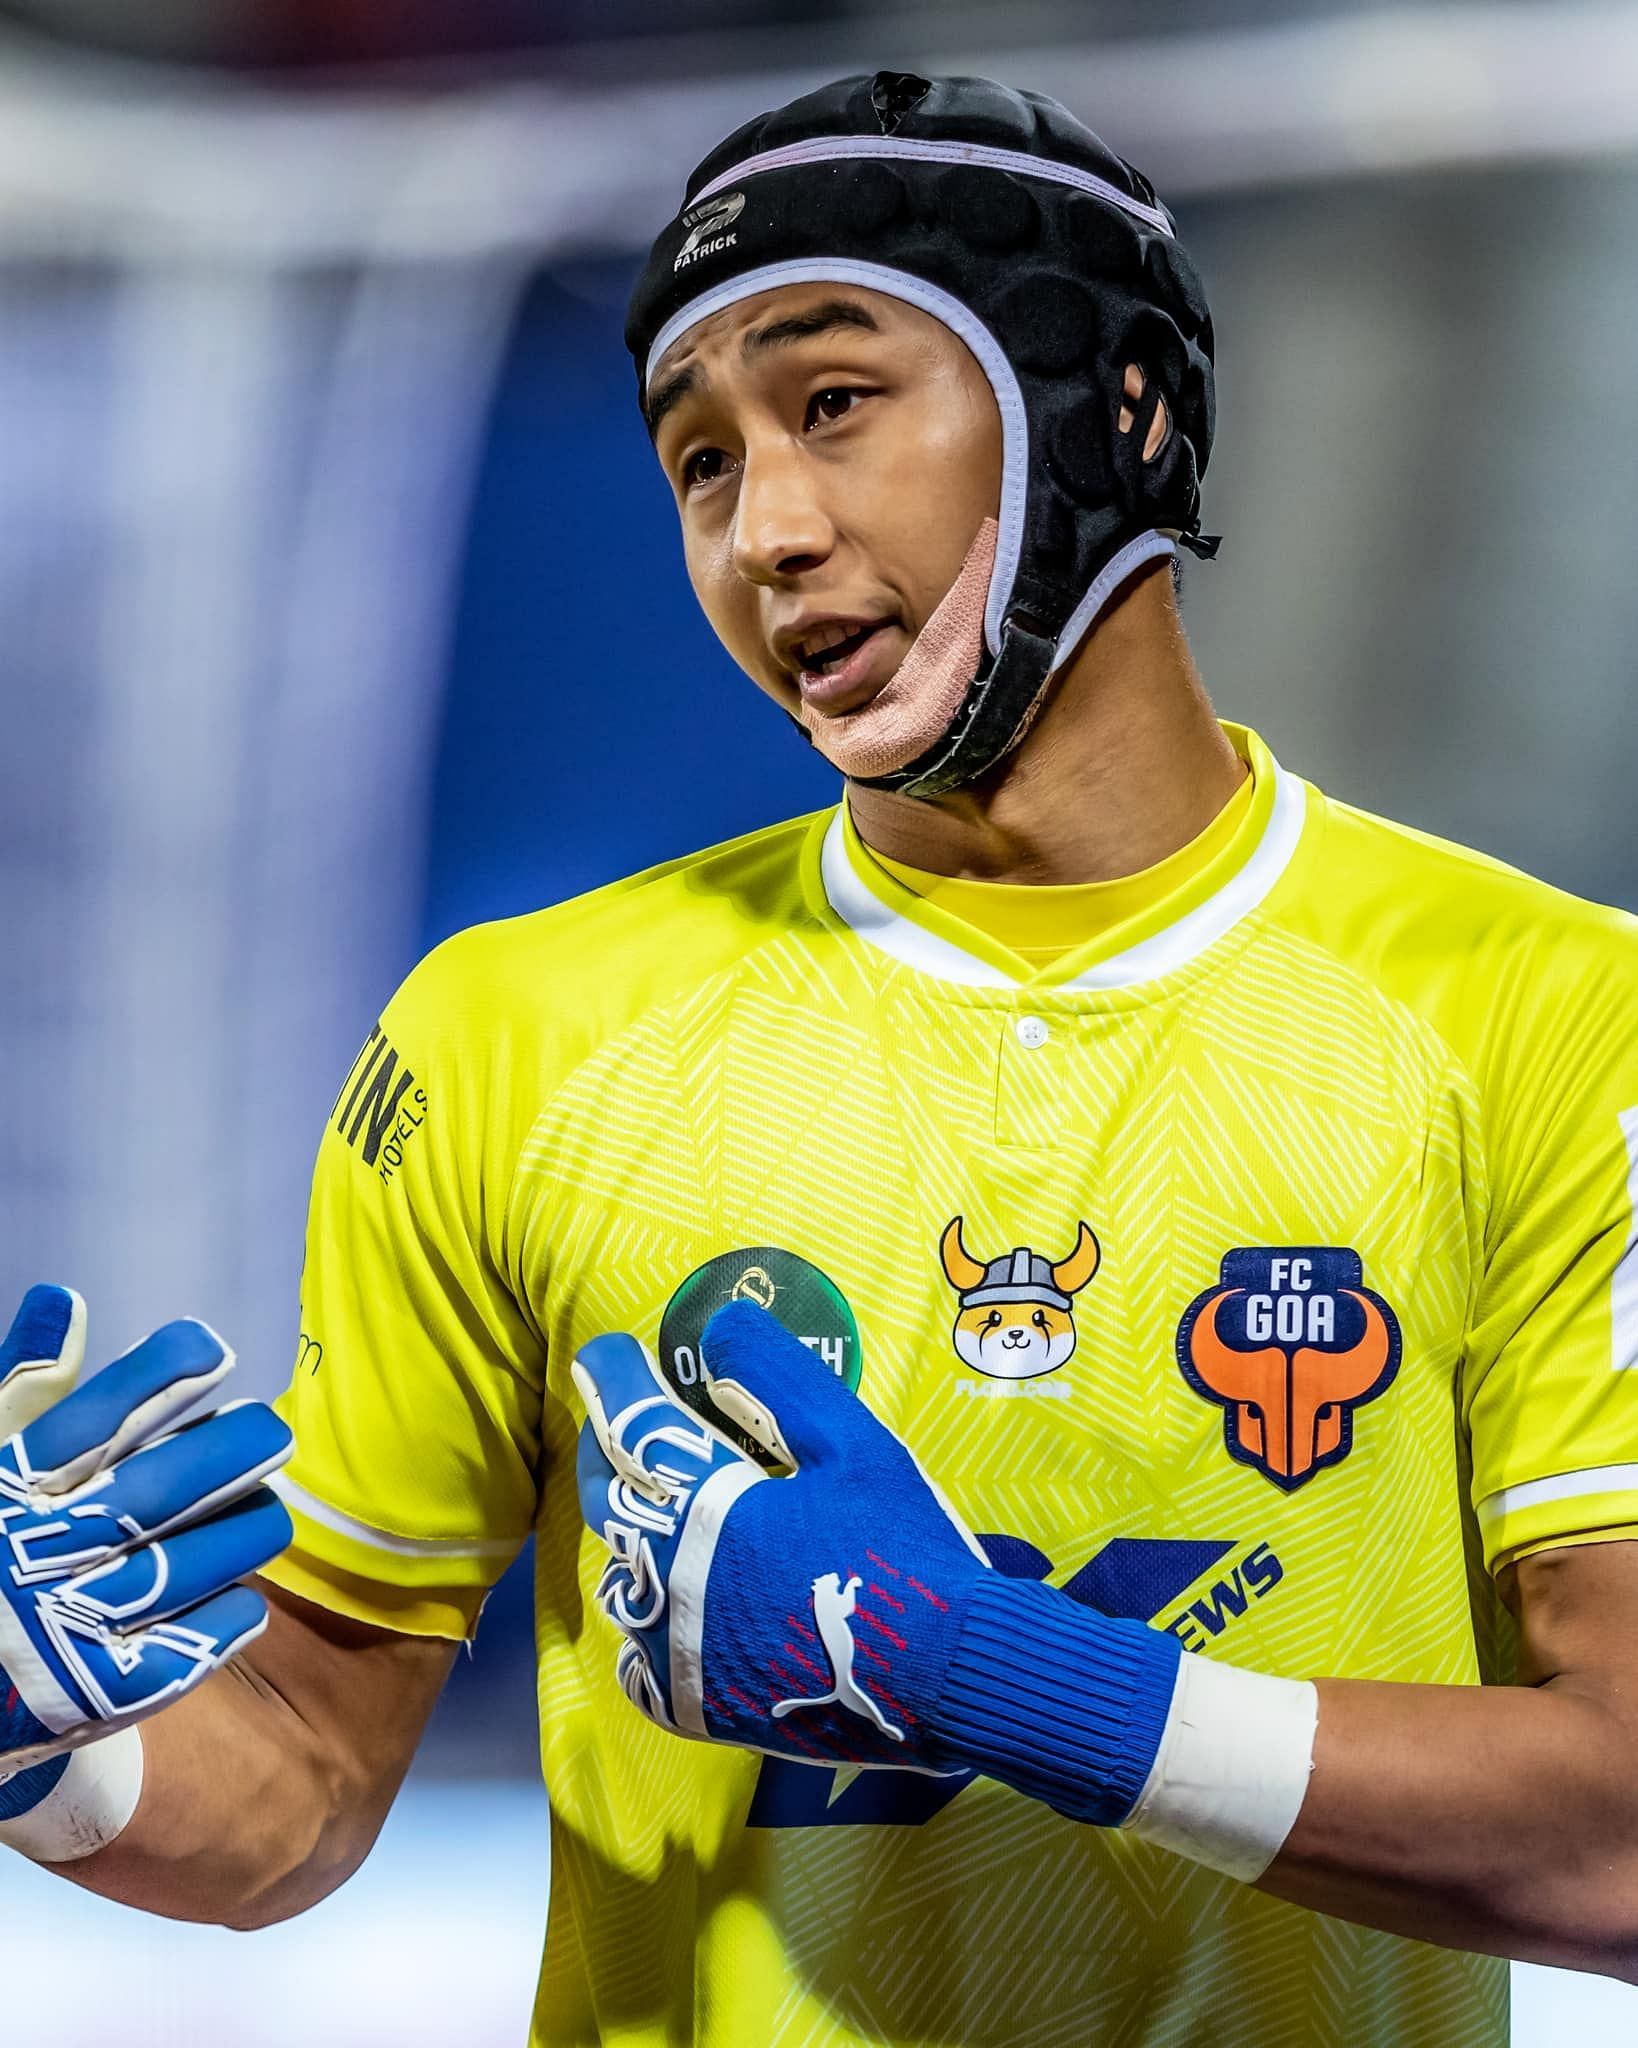 Dheeraj played the game today wearing a protective headgear (Image courtesy: ISL social media)